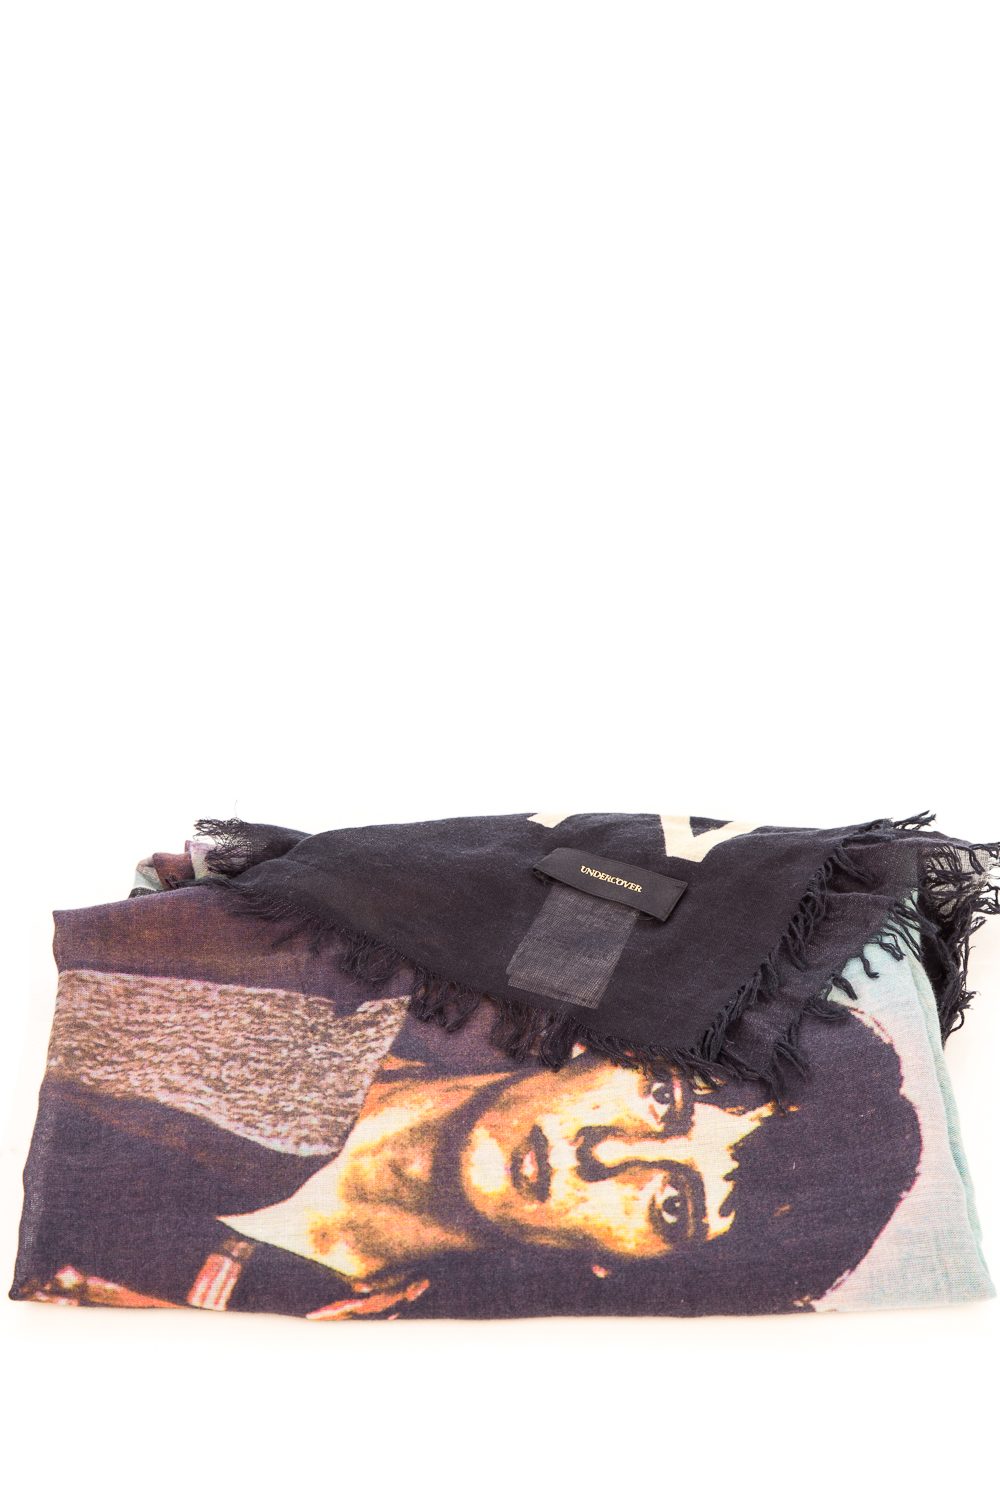 SS15 Television Marquee Moon Big Scarf